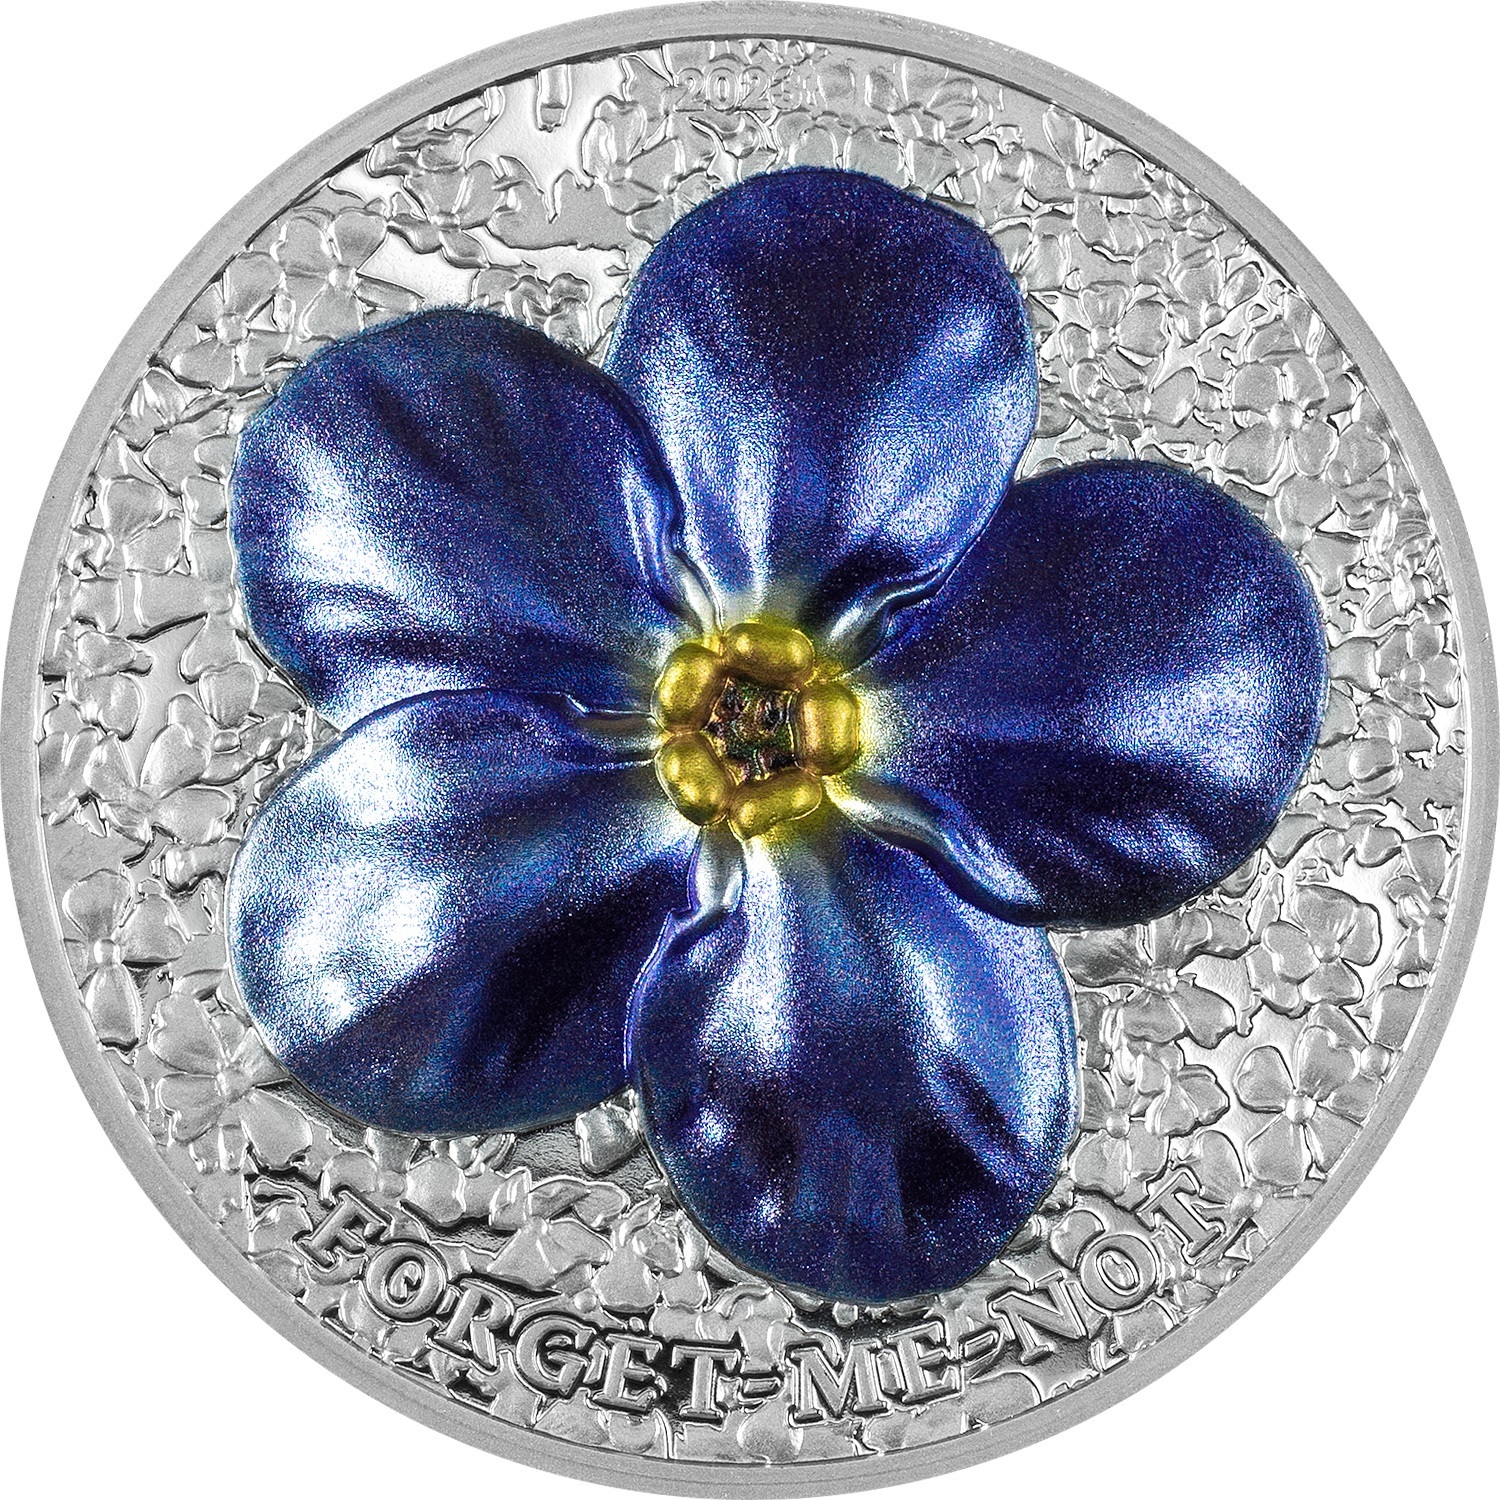 (W168.1.10.D.2023.2) Palau 10 Dollars Forget Me Not 2023 - Proof silver Reverse (zoom)